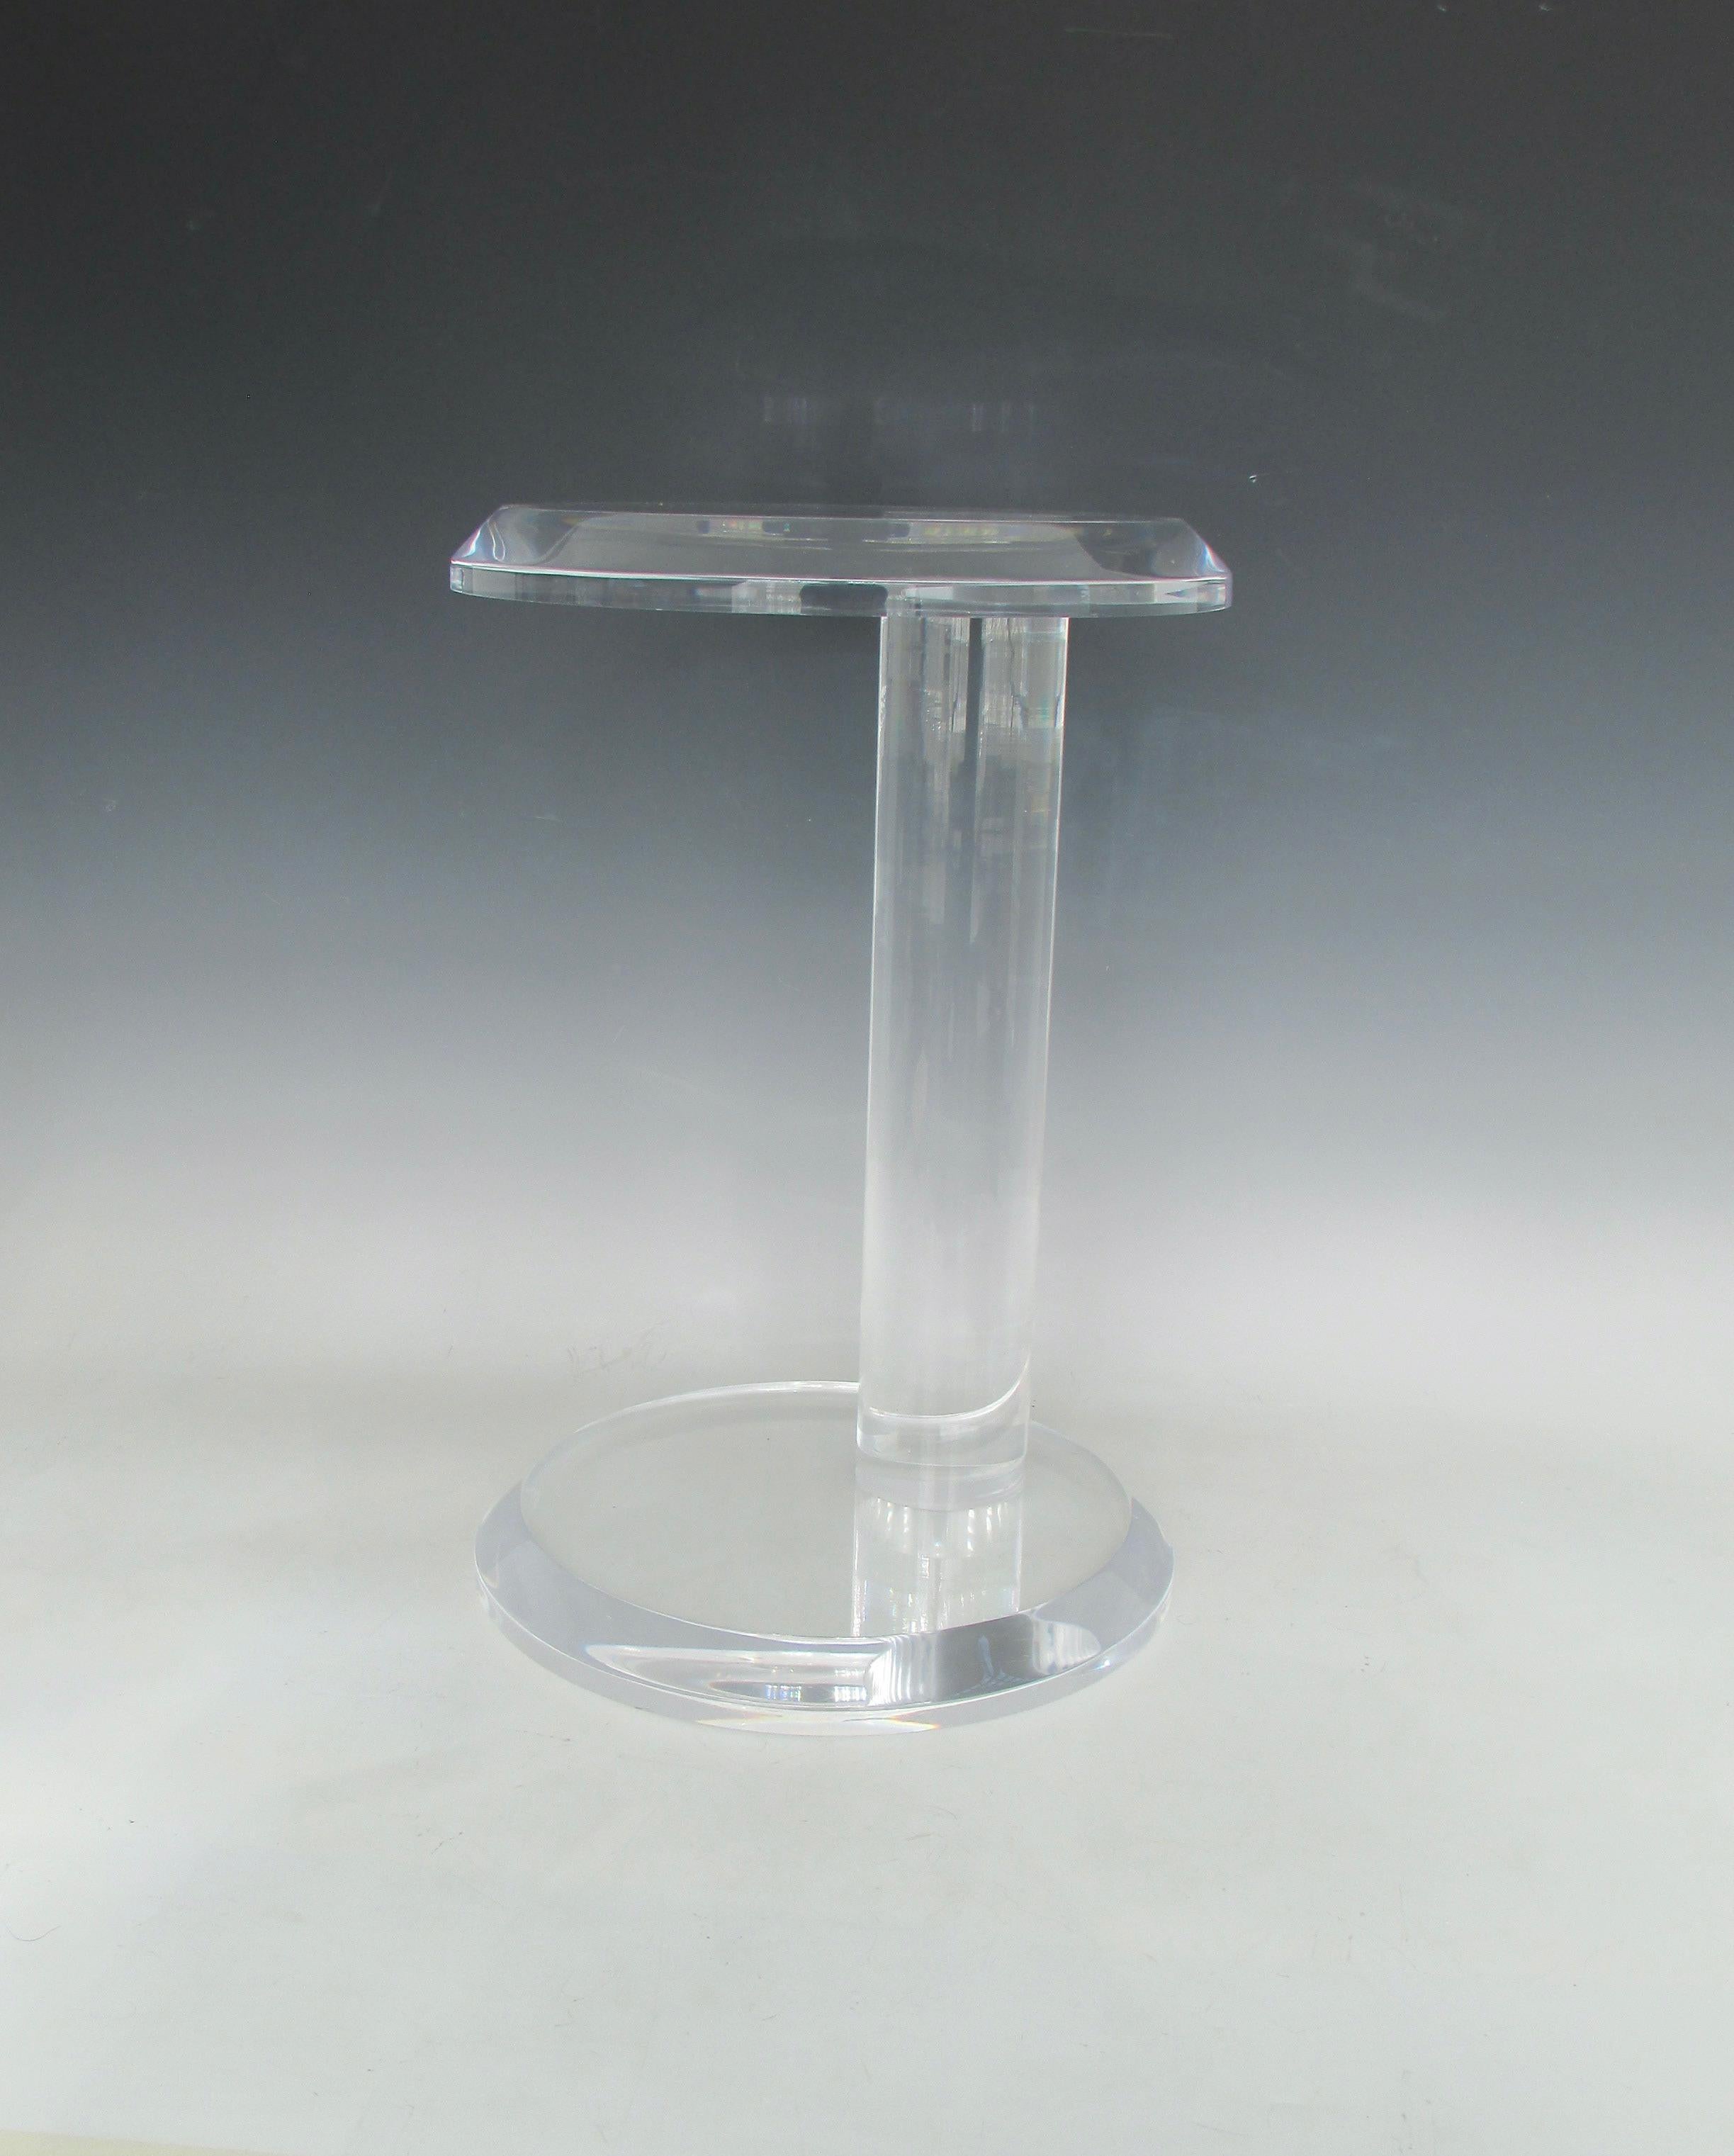 Beautifully and simply designed round top lucite table. Asymmetrically placed round base holds thick acrylic shaft supporting cantilevered matching round top. Jewel of a table.